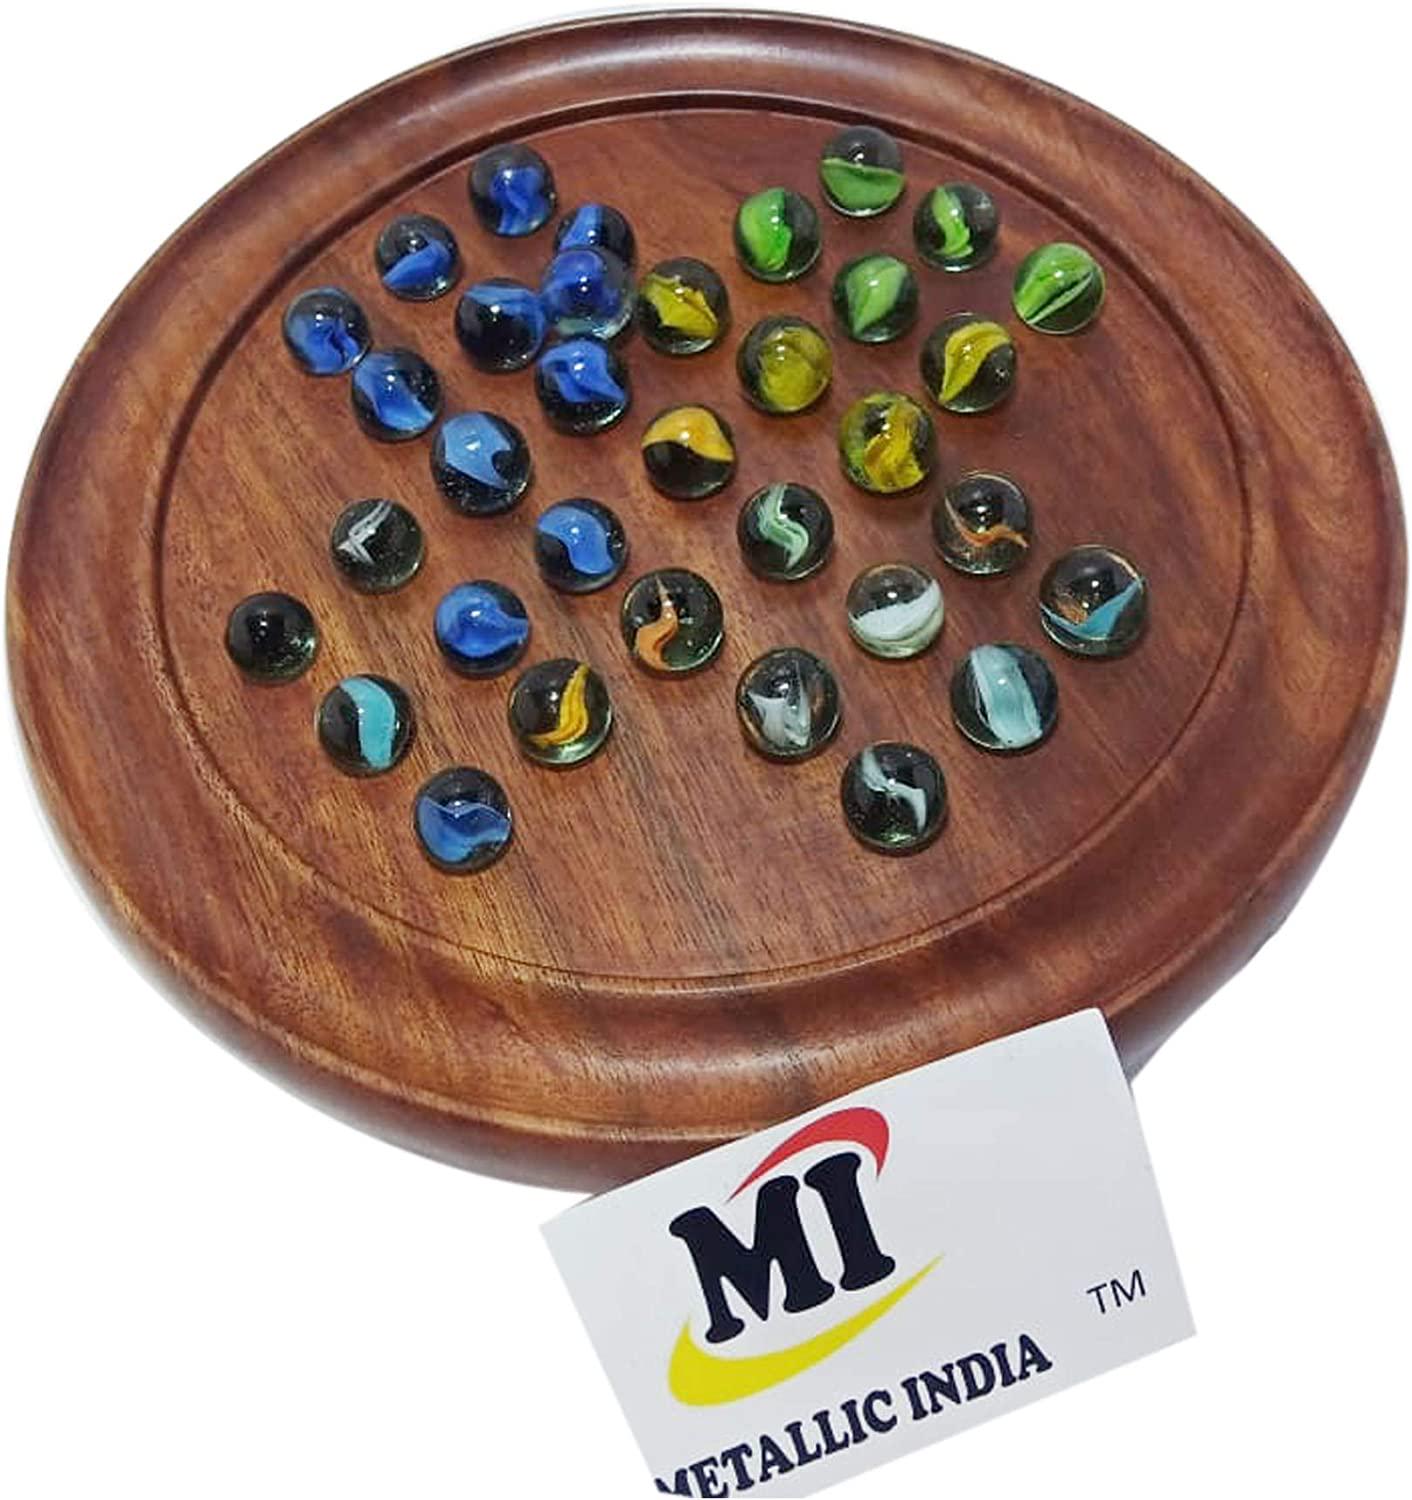 Metallic India, Games Solitaire Board in Wood with Glass Marbles